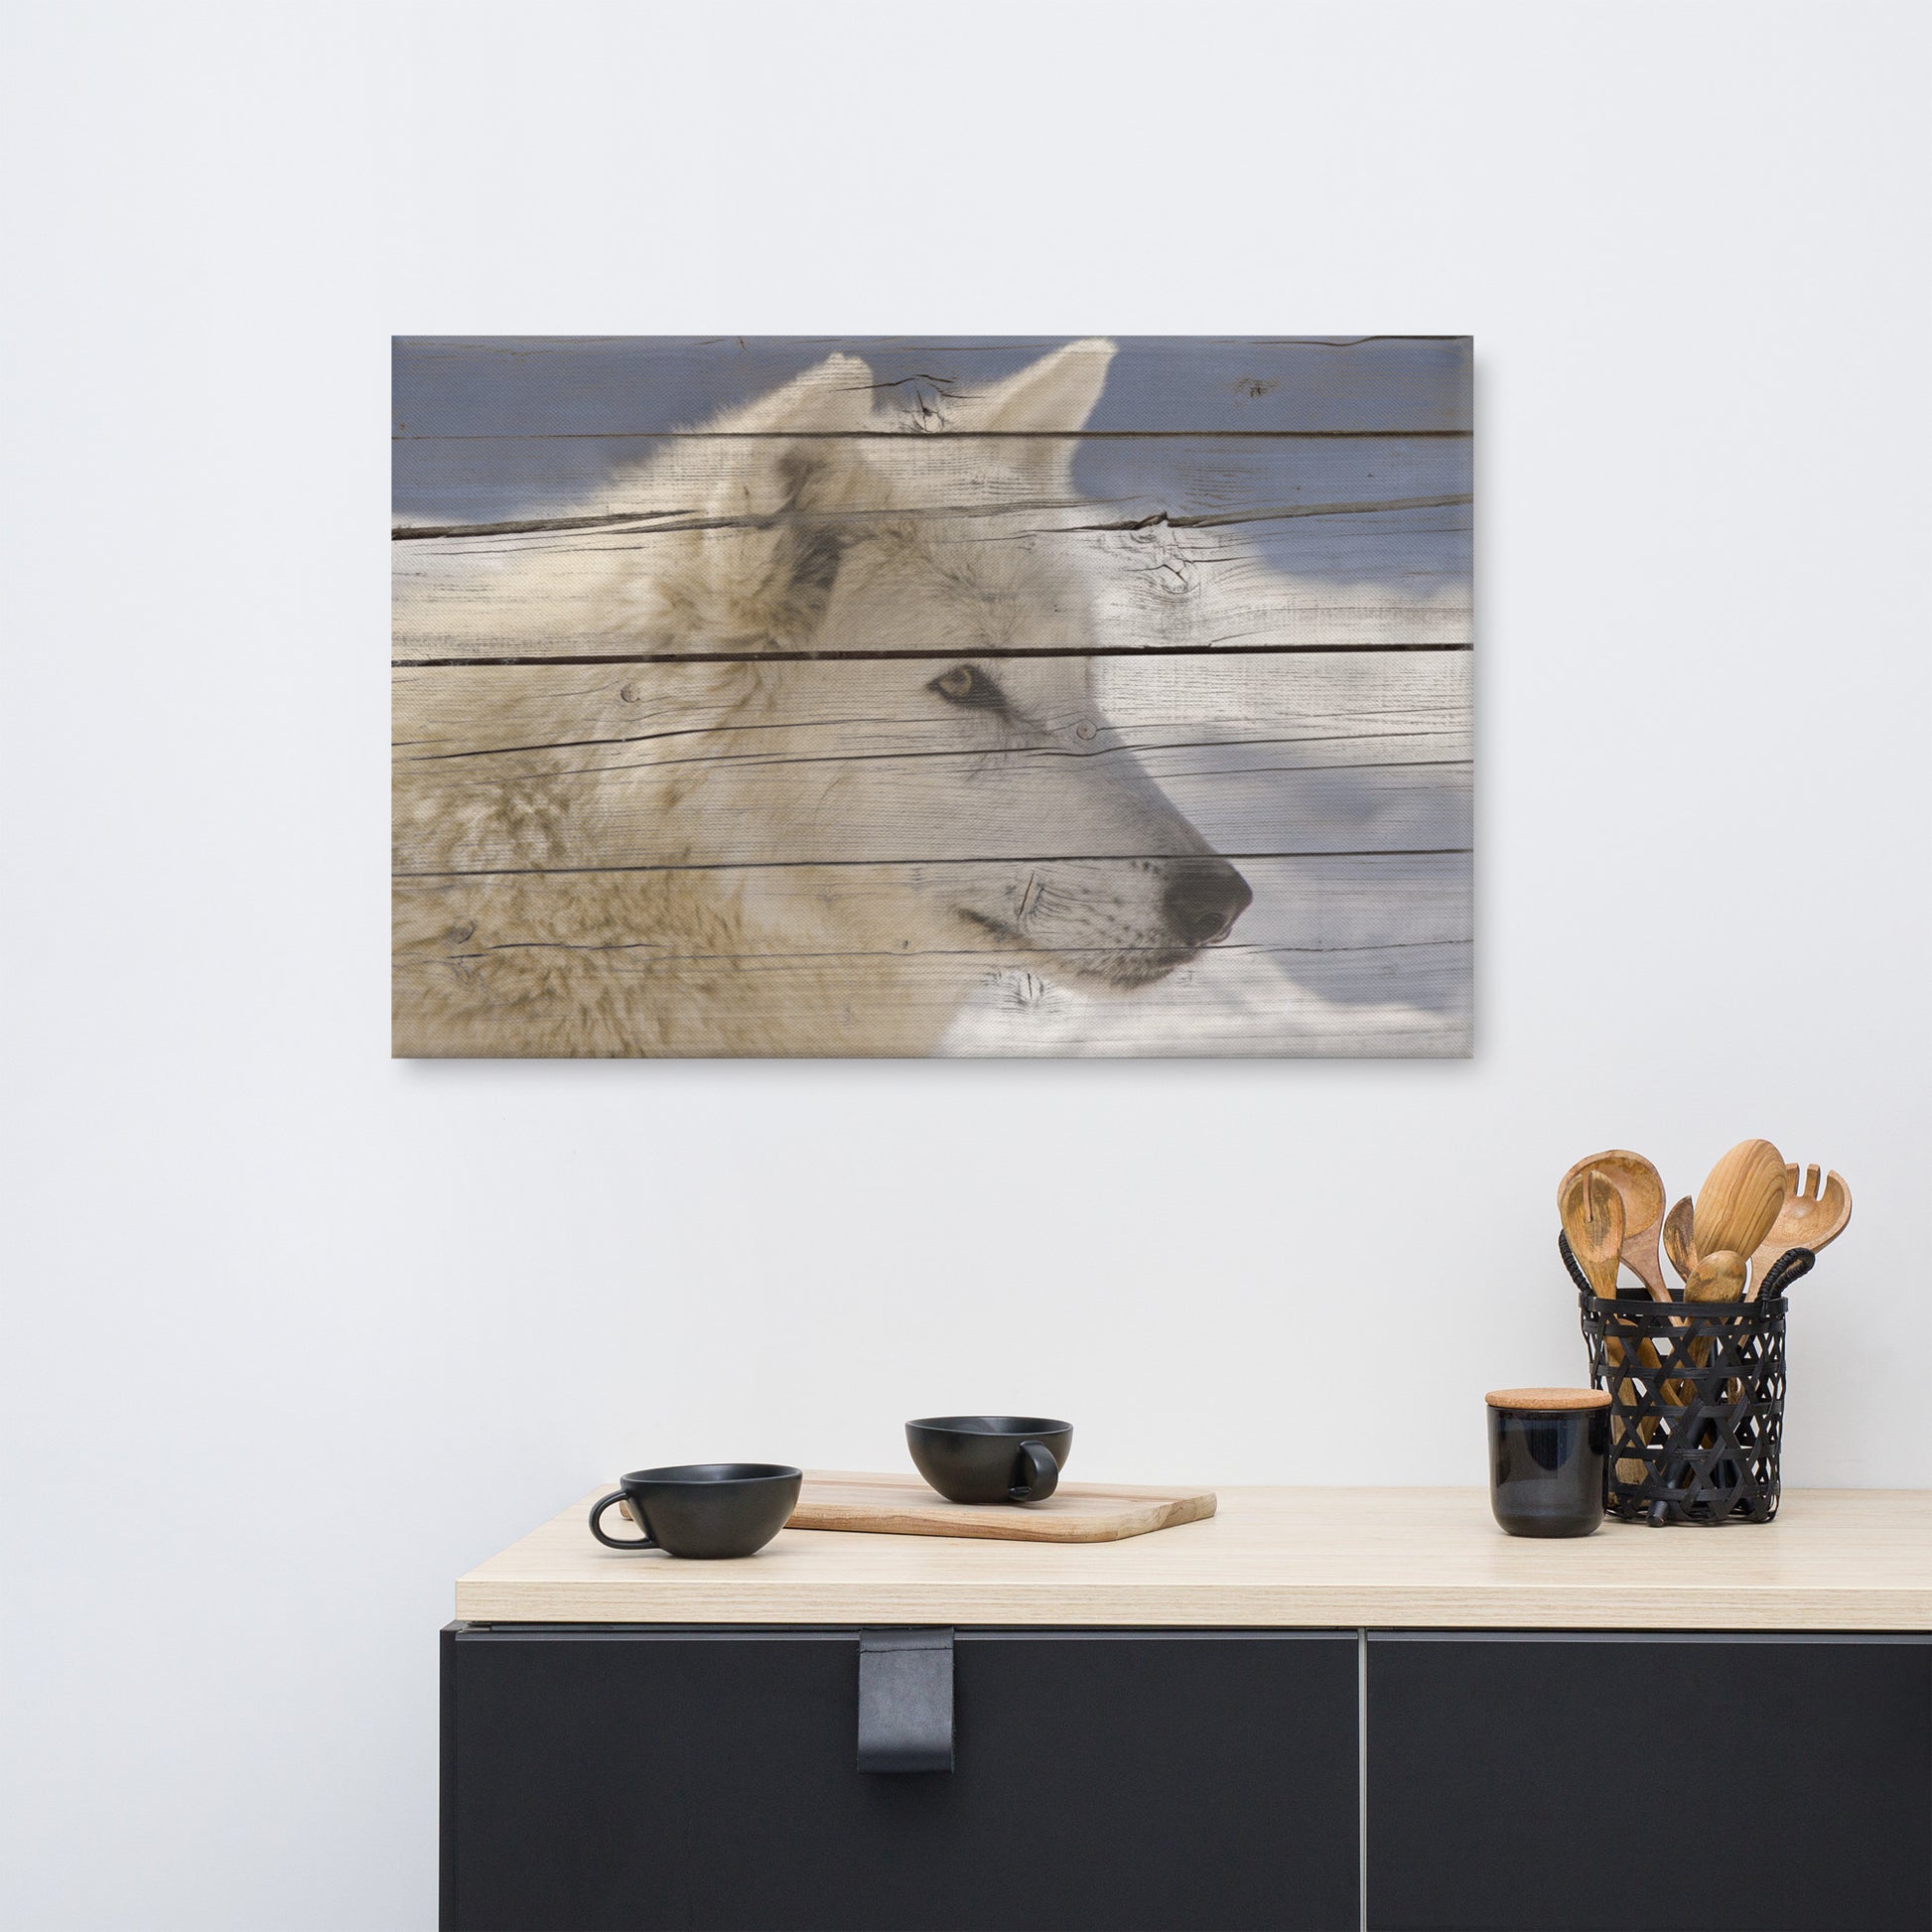 Farmhouse Wall Canvas: Aries the White Wolf Portrait on Faux Weathered Wood Texture - Wildlife / Animal / Nature Photograph Canvas Wall Art Print - Artwork